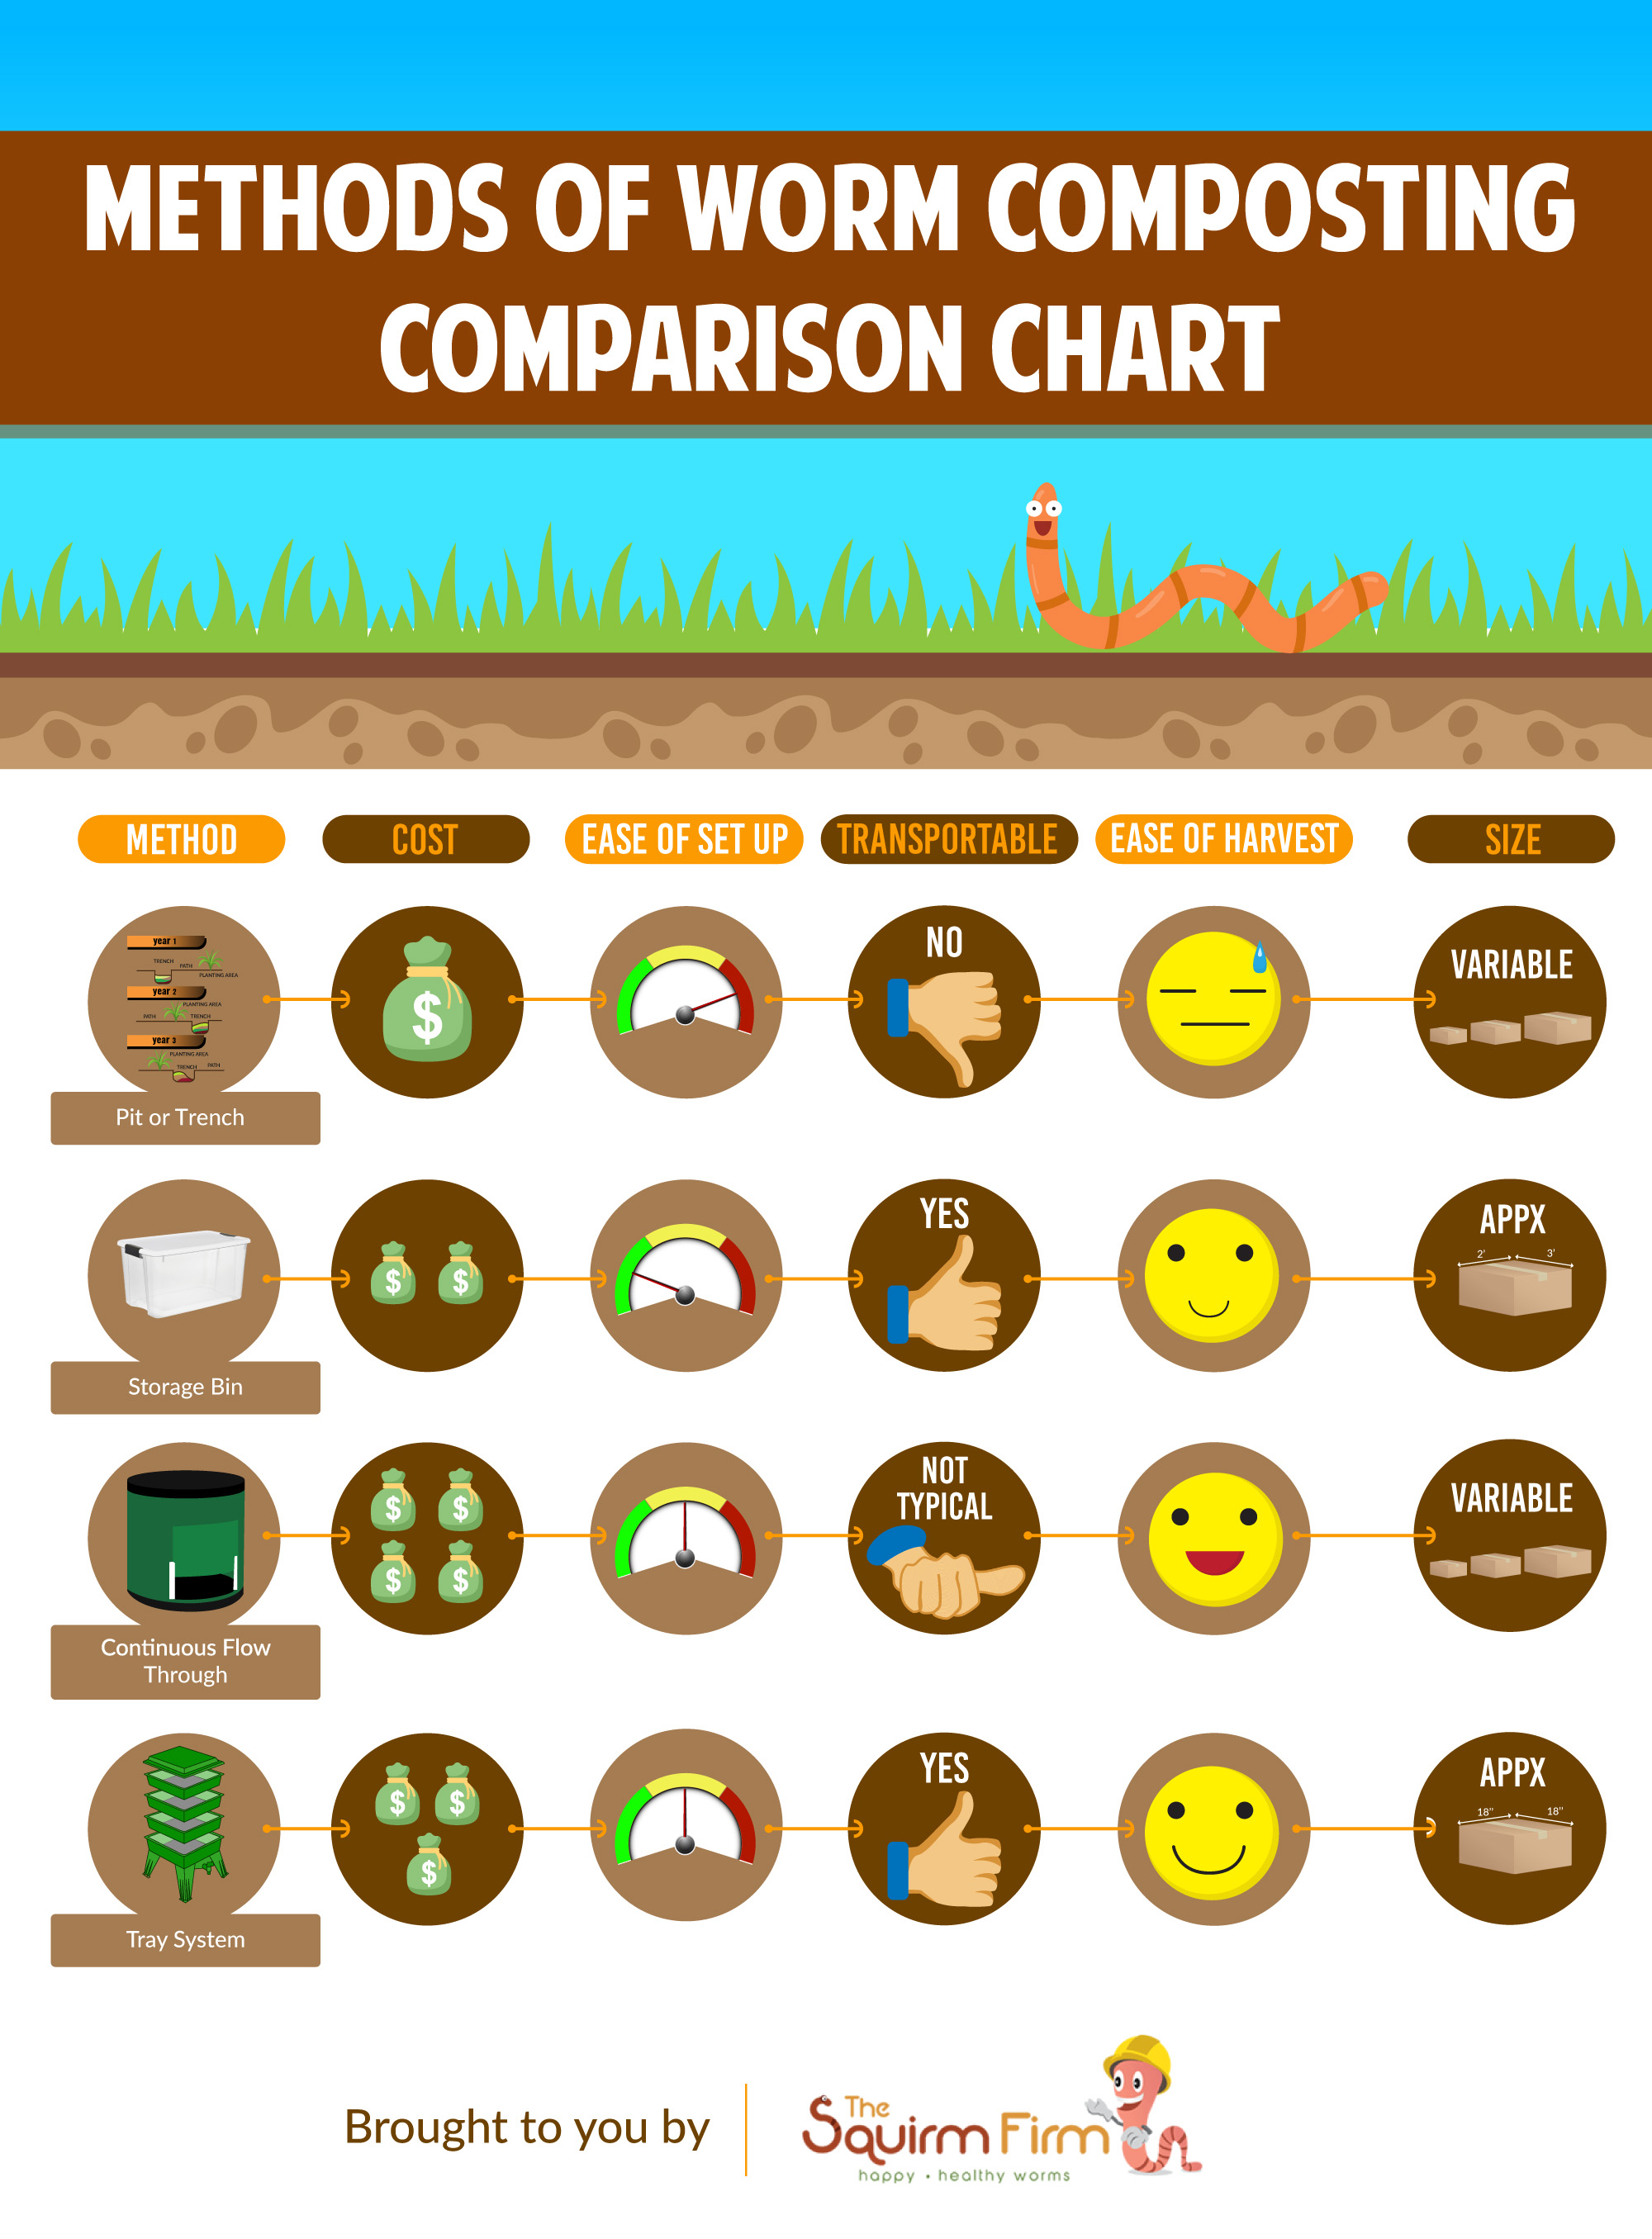 Which Of The Most Popular Worm Composting Methods Suits You Best?